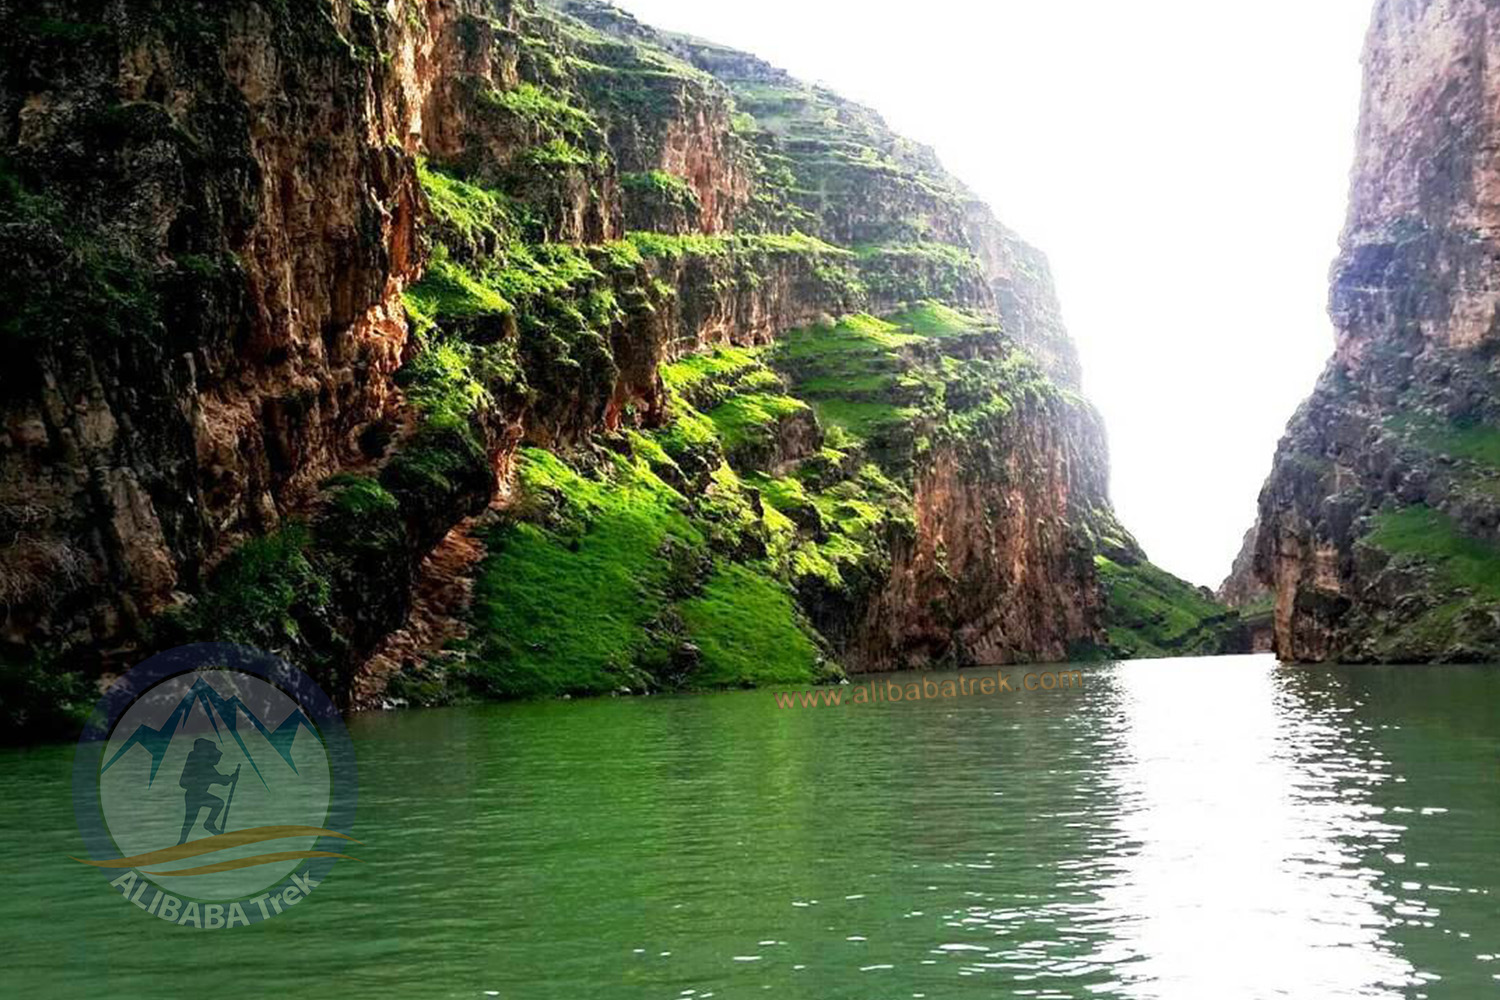 Tang Kafri is located 55 km from Ilam / Dareh Shahr Road and 15 km from Badreh